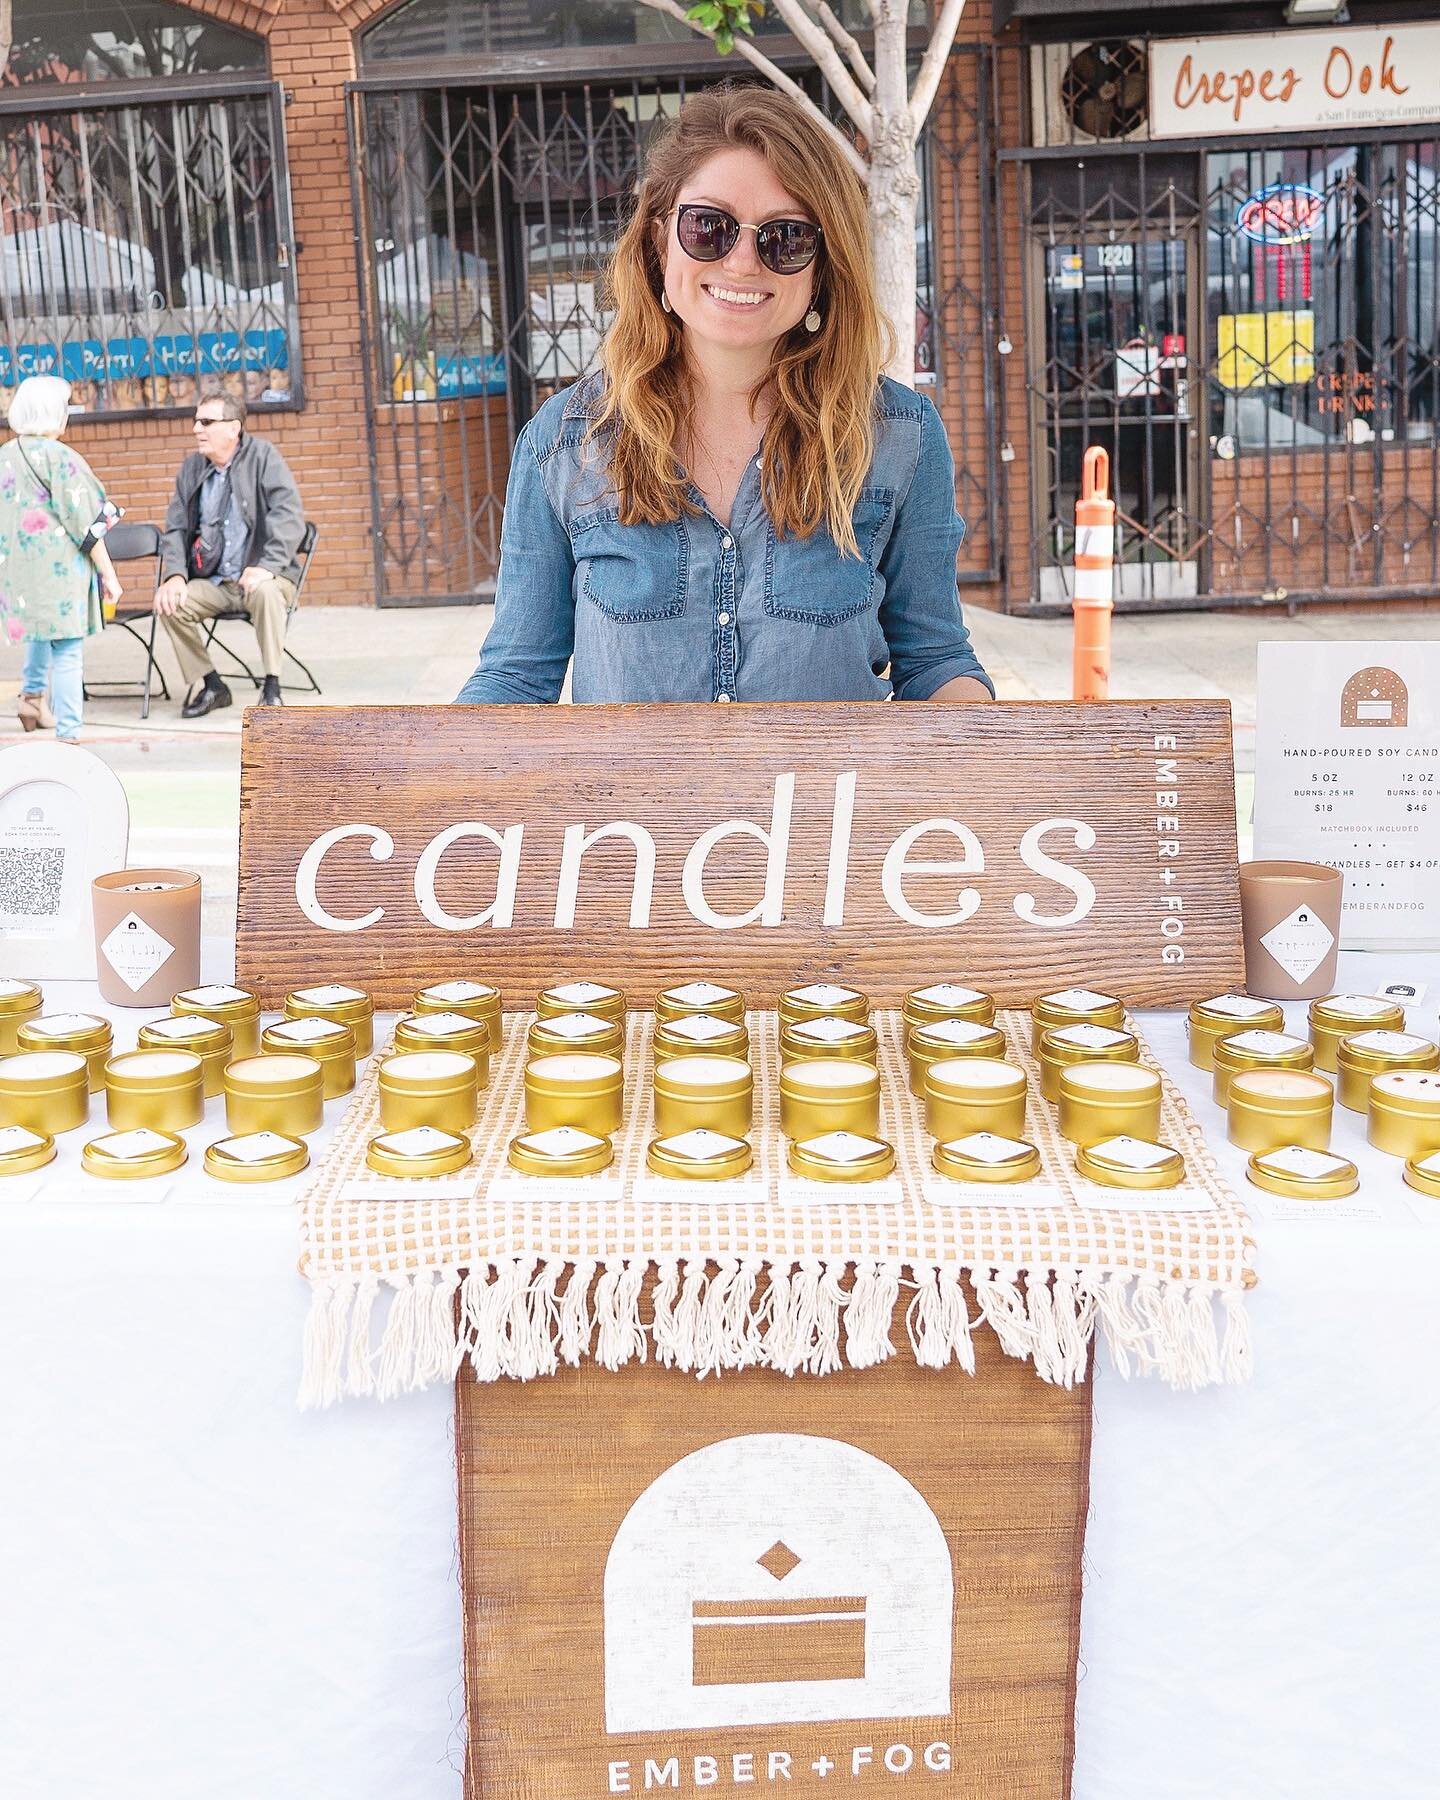 It&rsquo;s been an incredible year selling my handmade candles full-time. 

This year I&rsquo;ve been a part of farmer&rsquo;s markets, artist showcases, music festivals, spiritual gatherings, pride celebrations, Punjabi dance parties, Filipino block